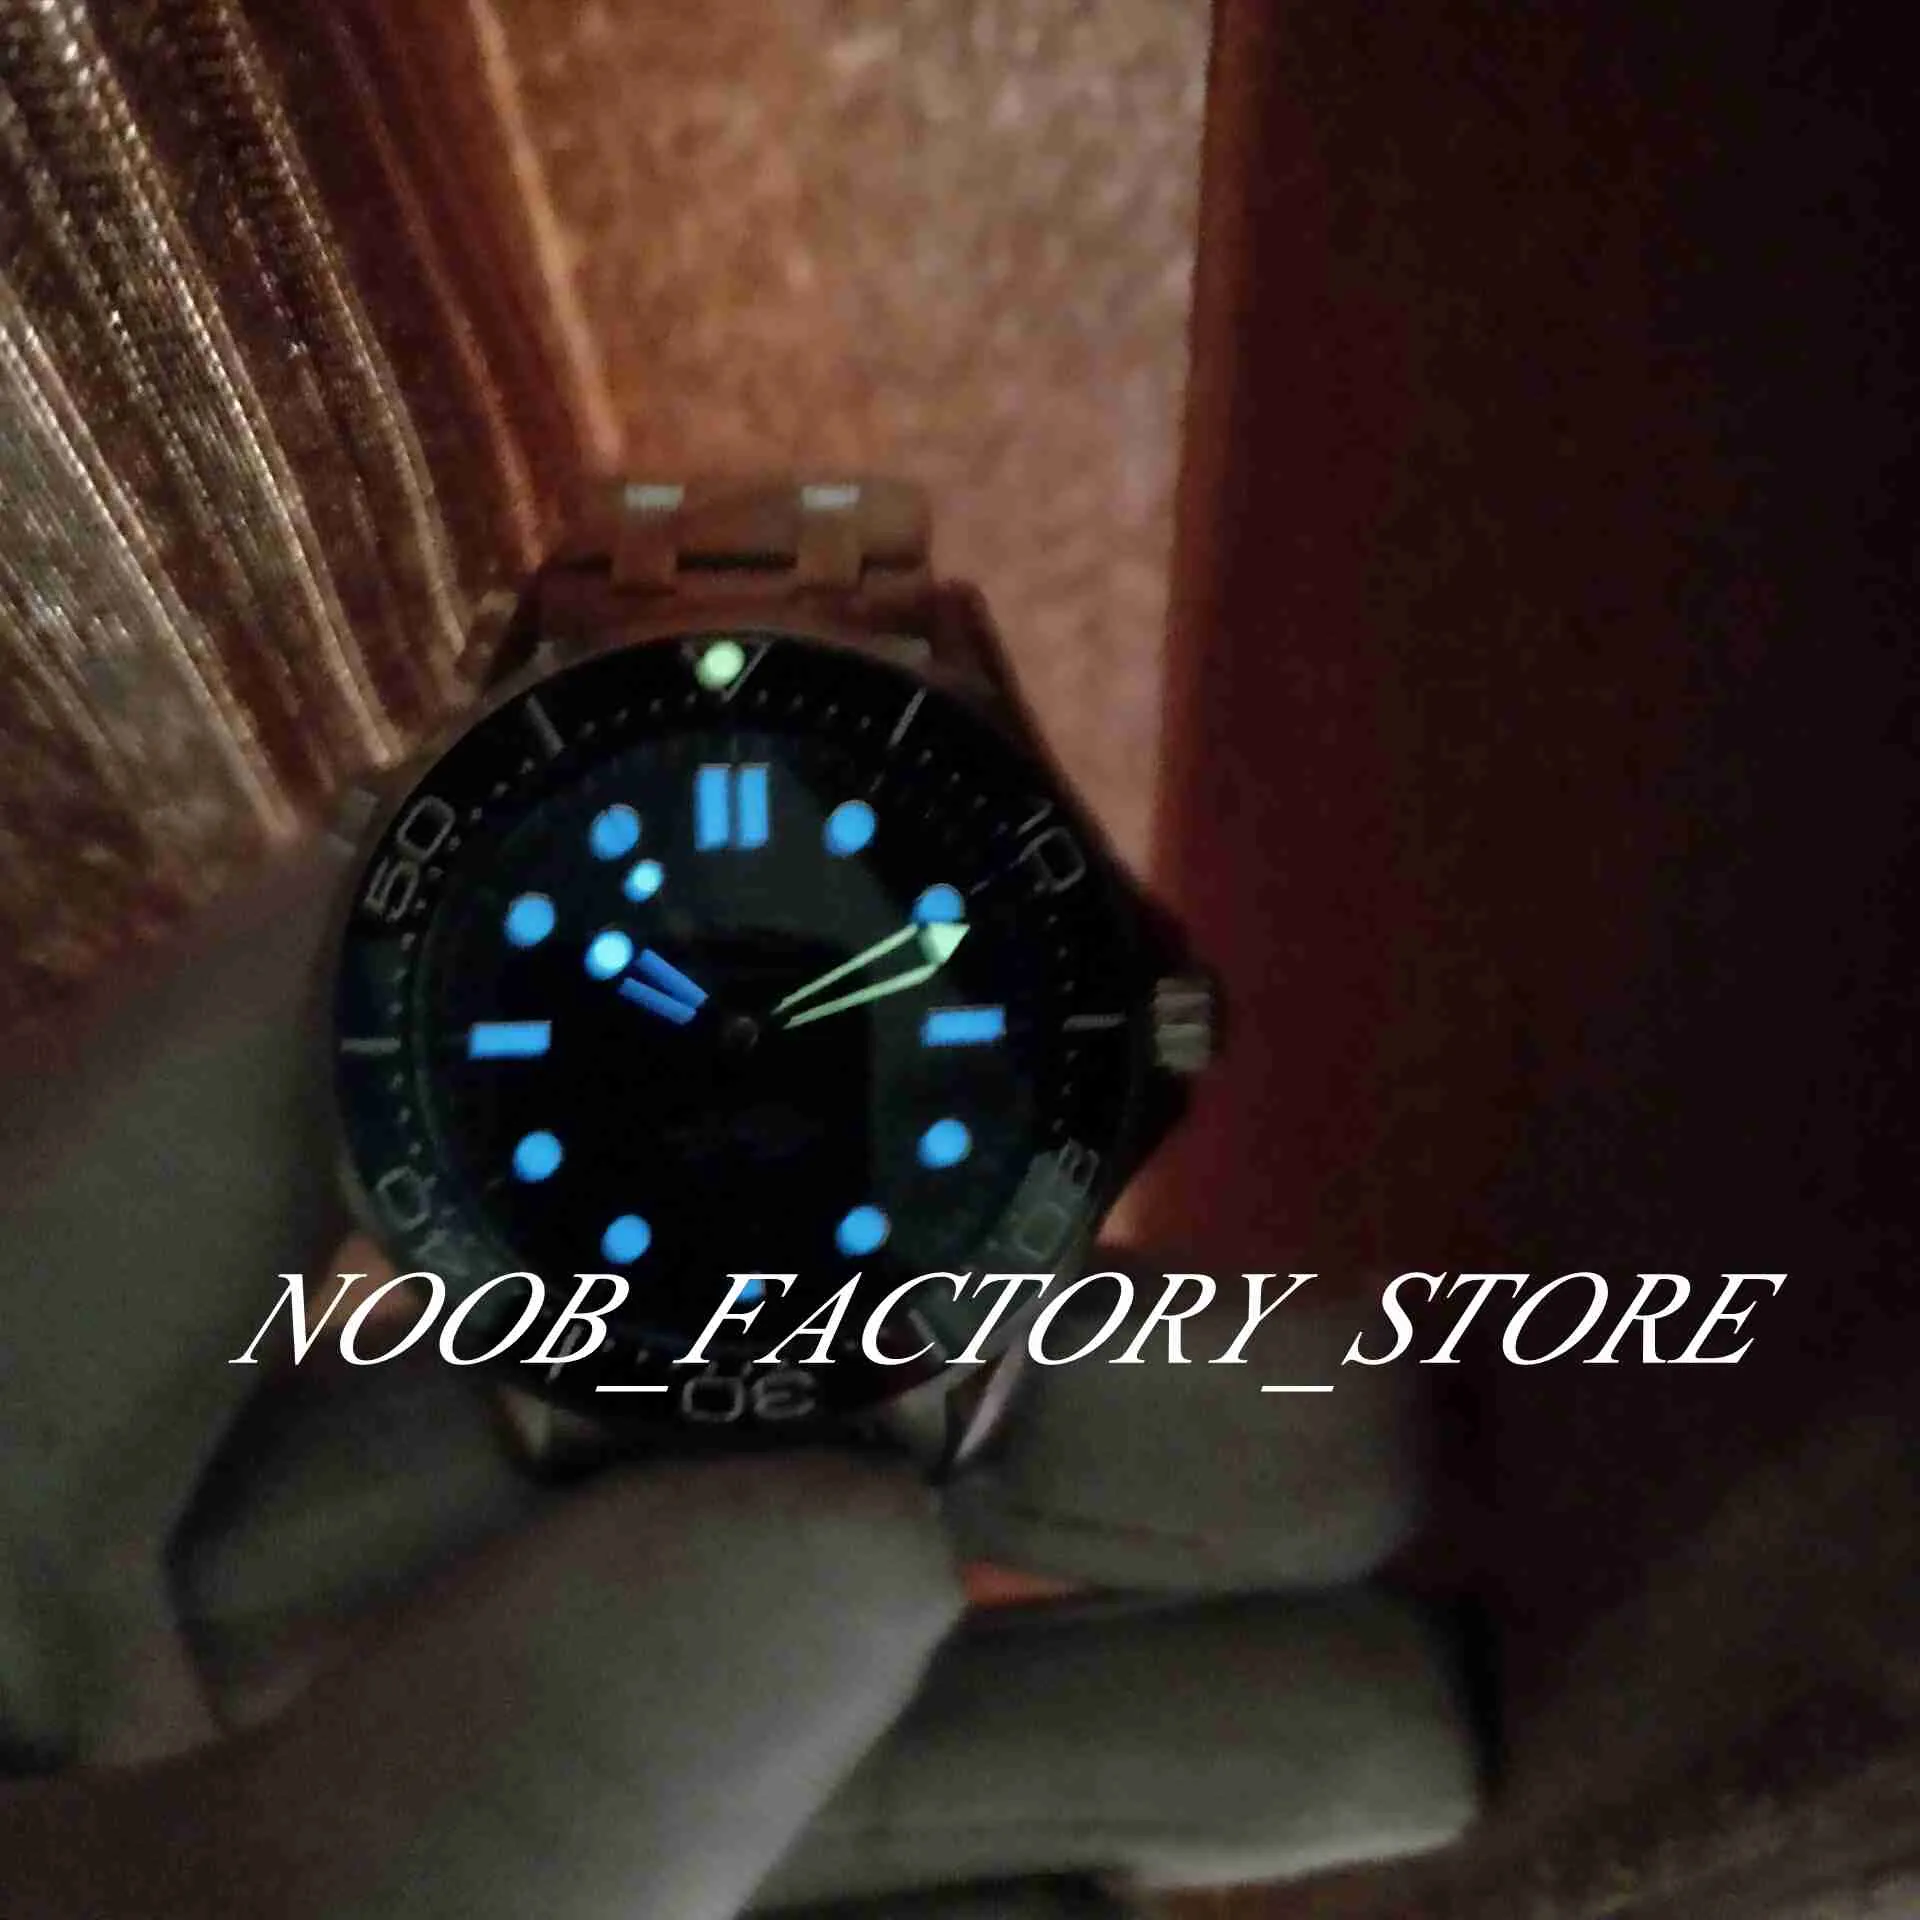 Super Factory S Watch UNIKRECTIONAL ROTATHING RAMEL Black Dial 300m nurkowe Luminous 42mmstainless Stal Pass Cal 88253y